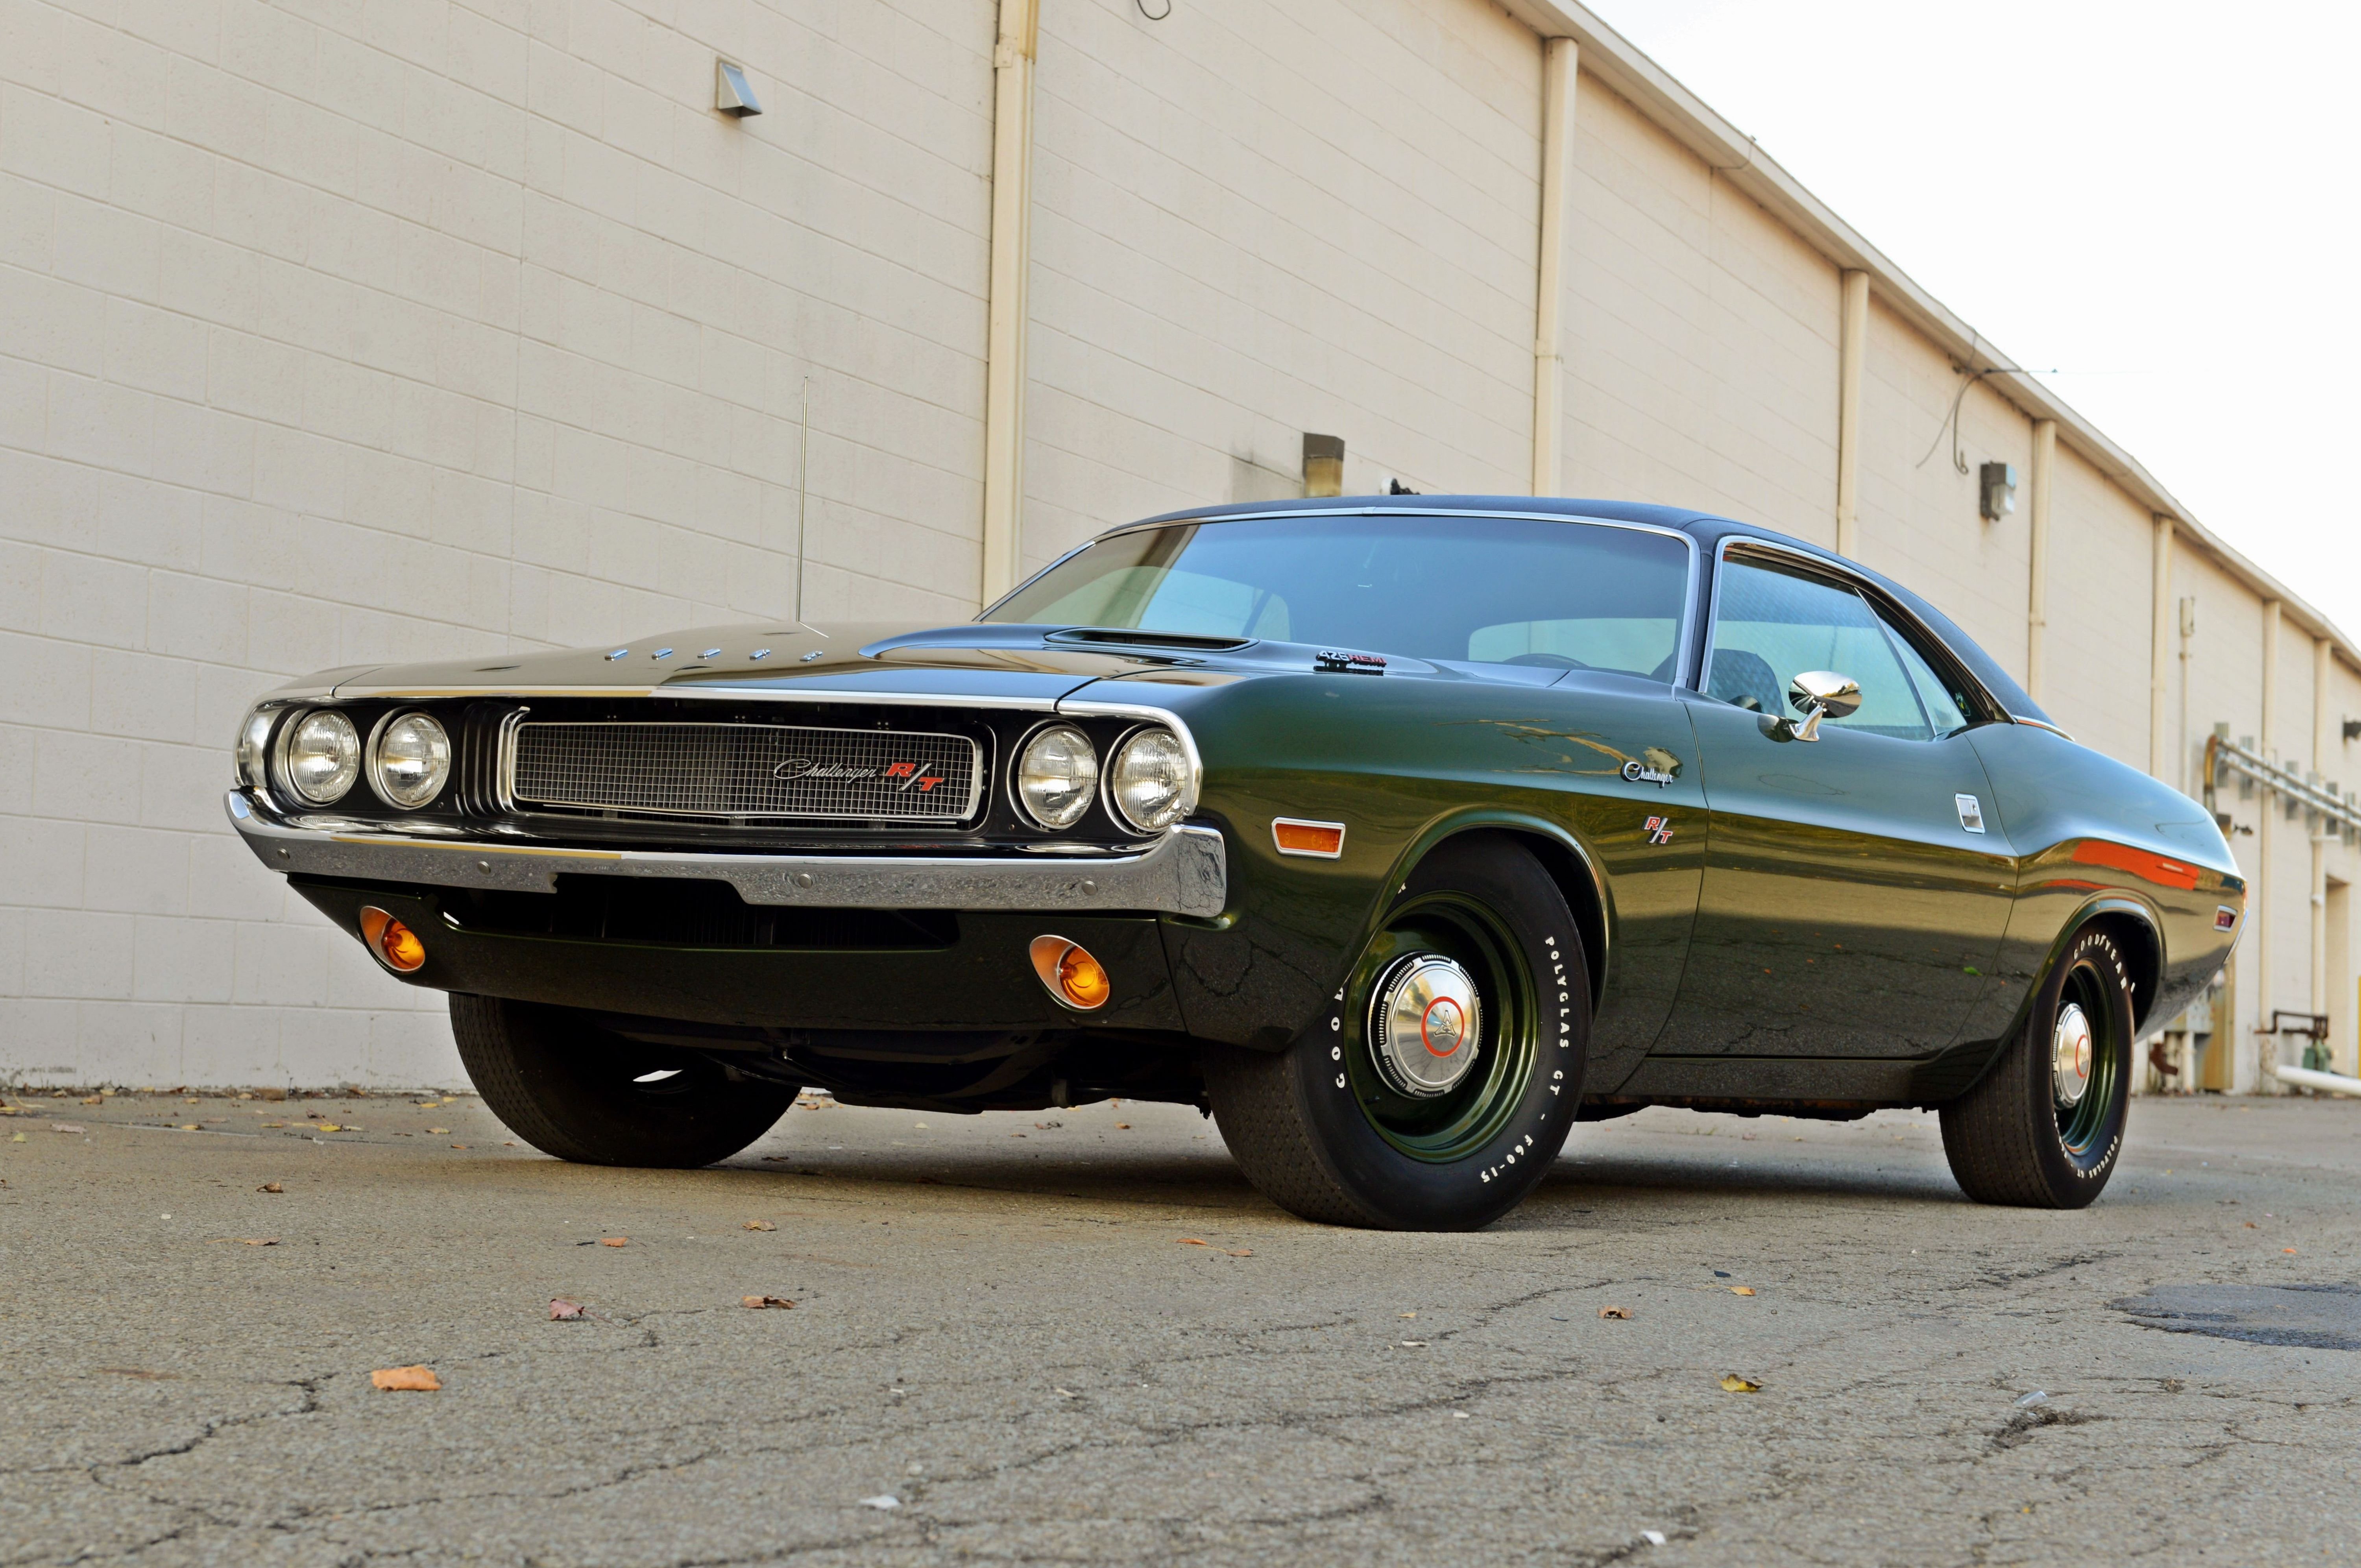 1970, Dodge, Challenger, Rt, Muscle, Classic, Old, Original, Usa, 6000x3985 01 Wallpaper